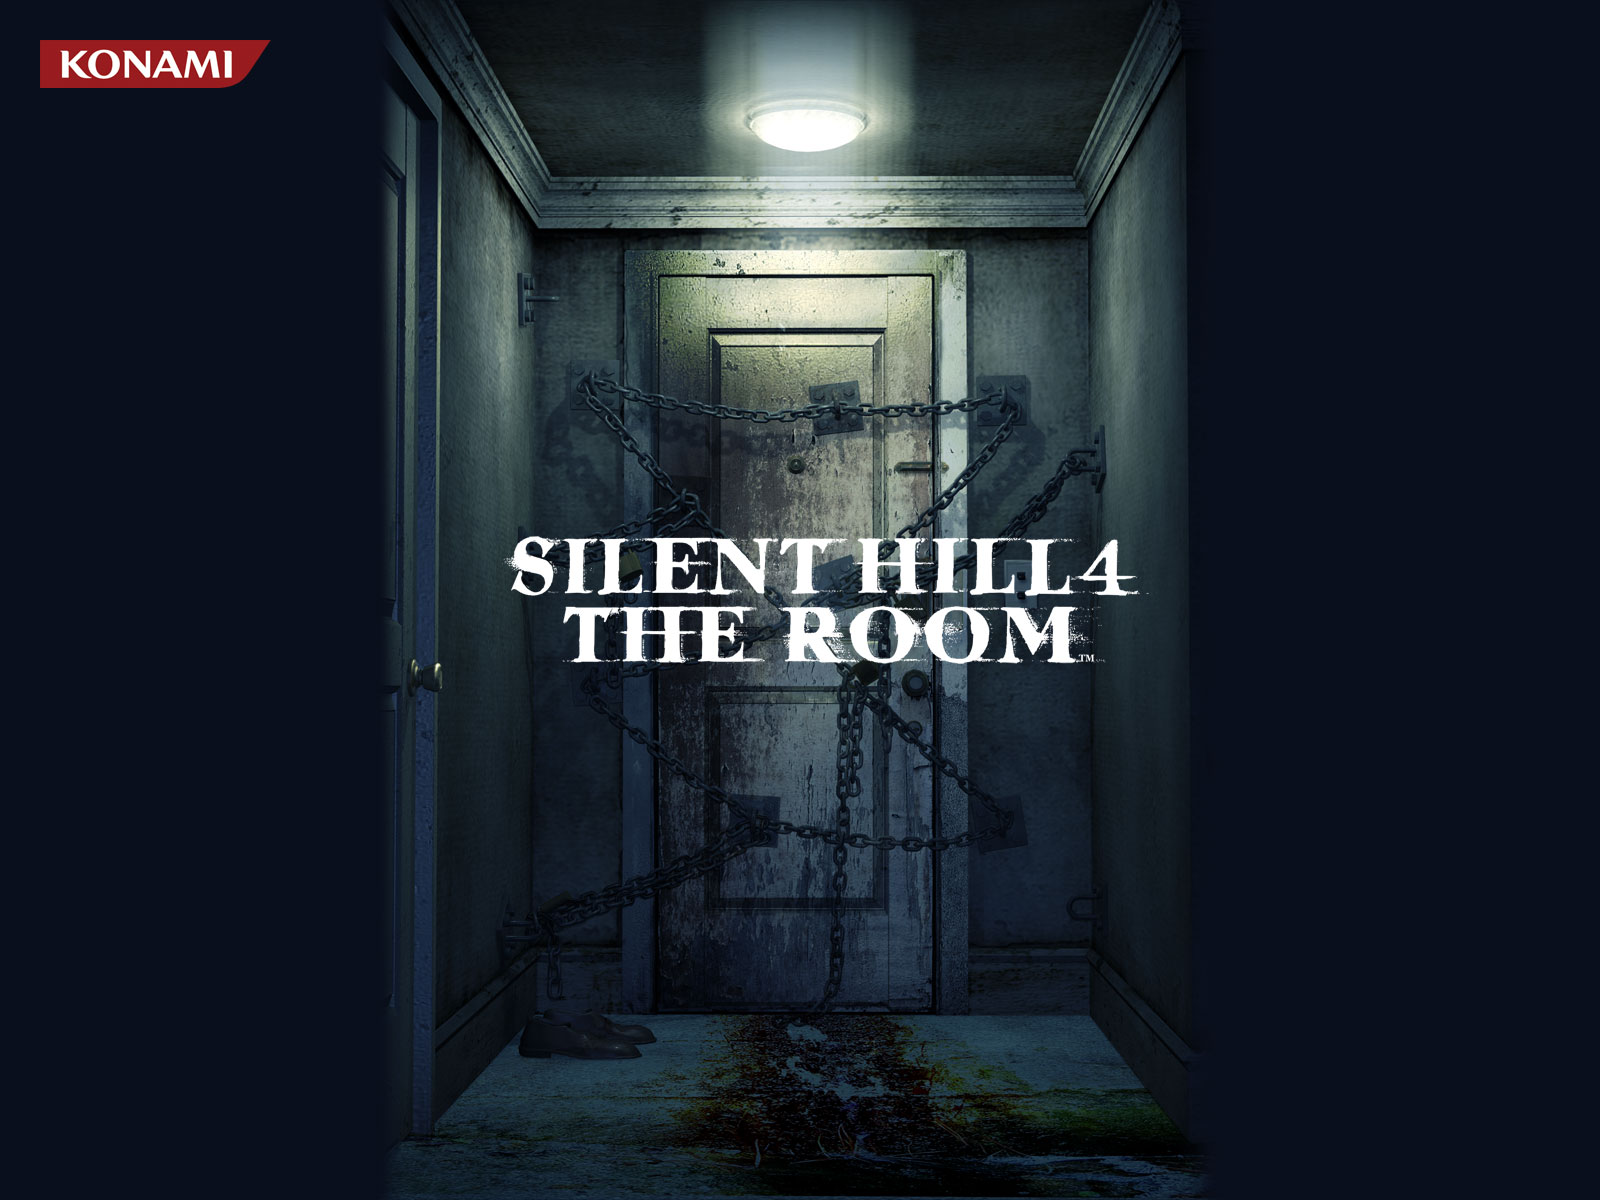 Silent Hill 4: The Room #15